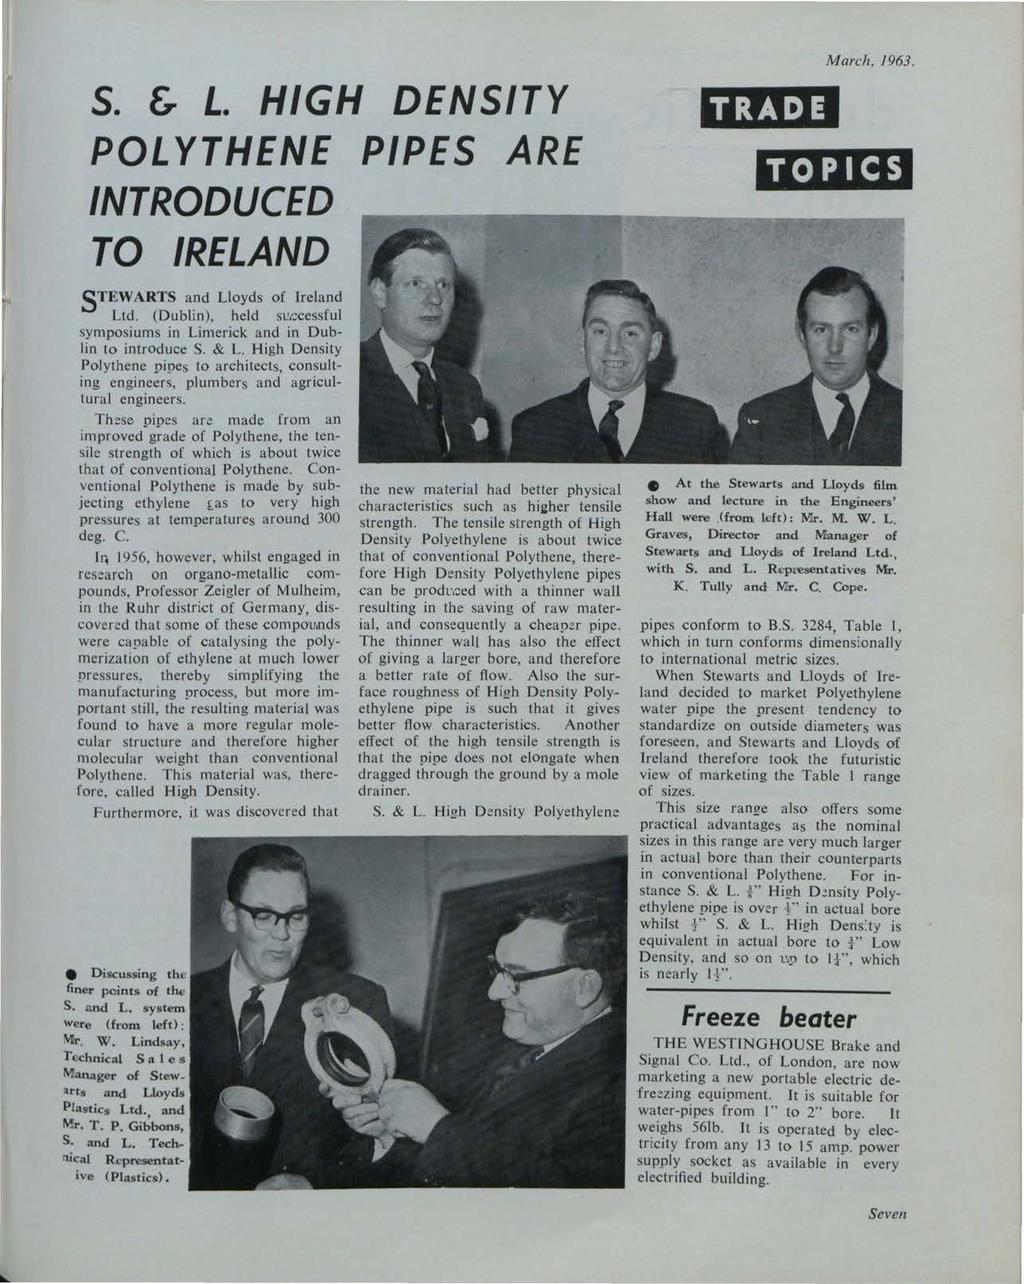 S. & L. HIGH DENSITY POLYTHENE PIPES ARE INTRODUCED TO IRELAND S TEWARTS and Lloyds of Ireland Ltd. (Dublin), held successful symposiums in Limerick and in Dublin to introduce S. & L. High Density Polythene pipes to architects, consulting engineers, plumbers and agricultural engineers.